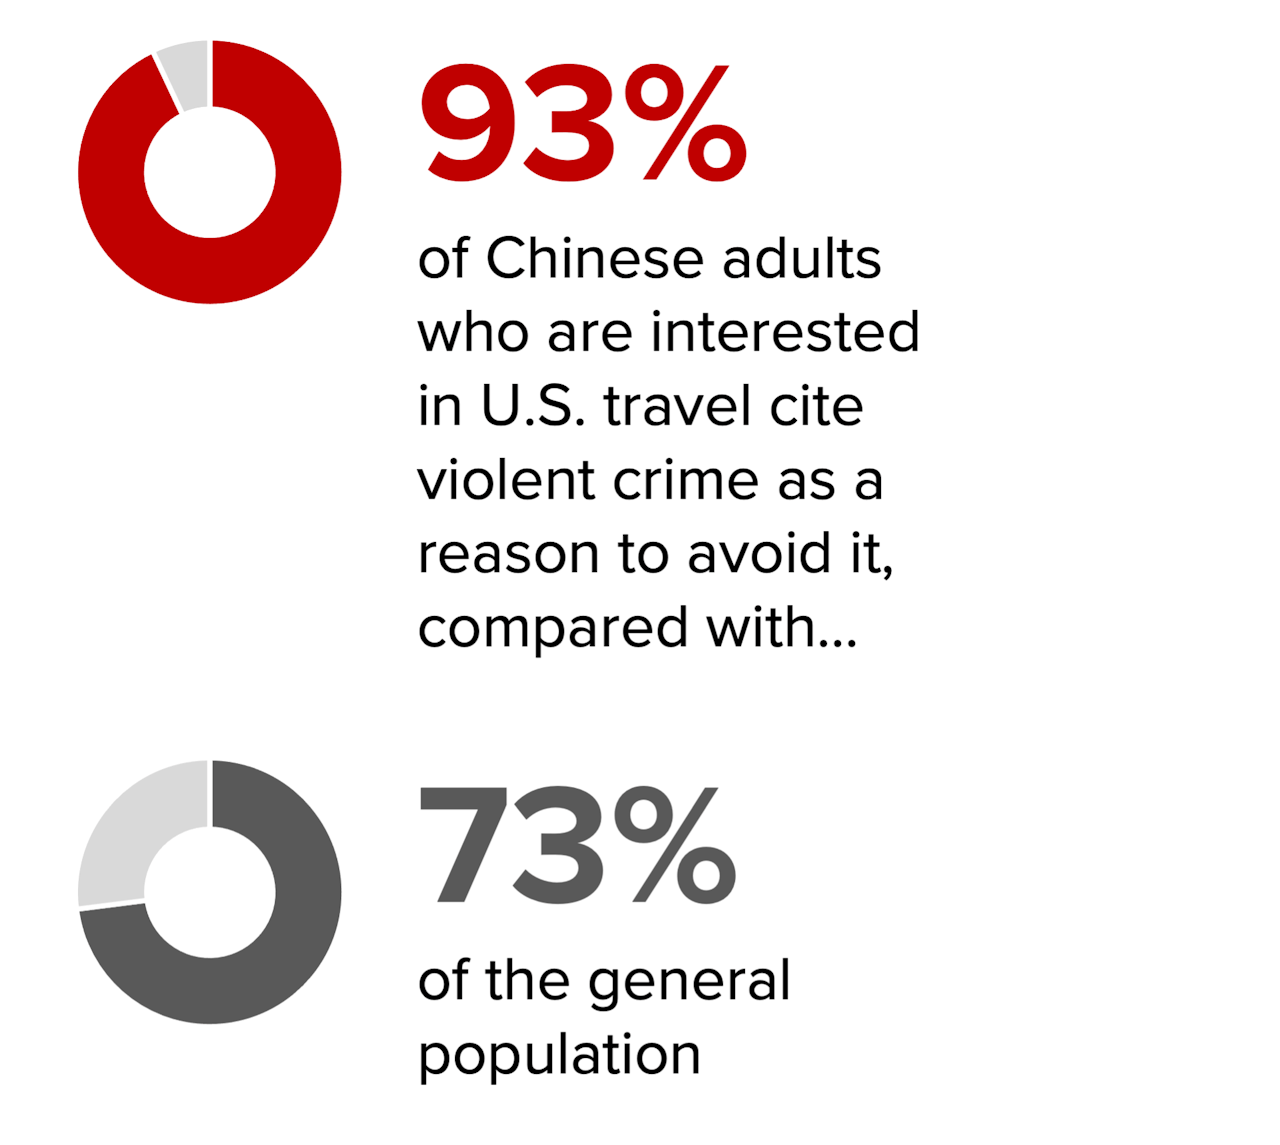 93% of Chinese adults who are interested in U.S. travel cite violent crime as a reason to avoid it, compared with.. 73% of the general population